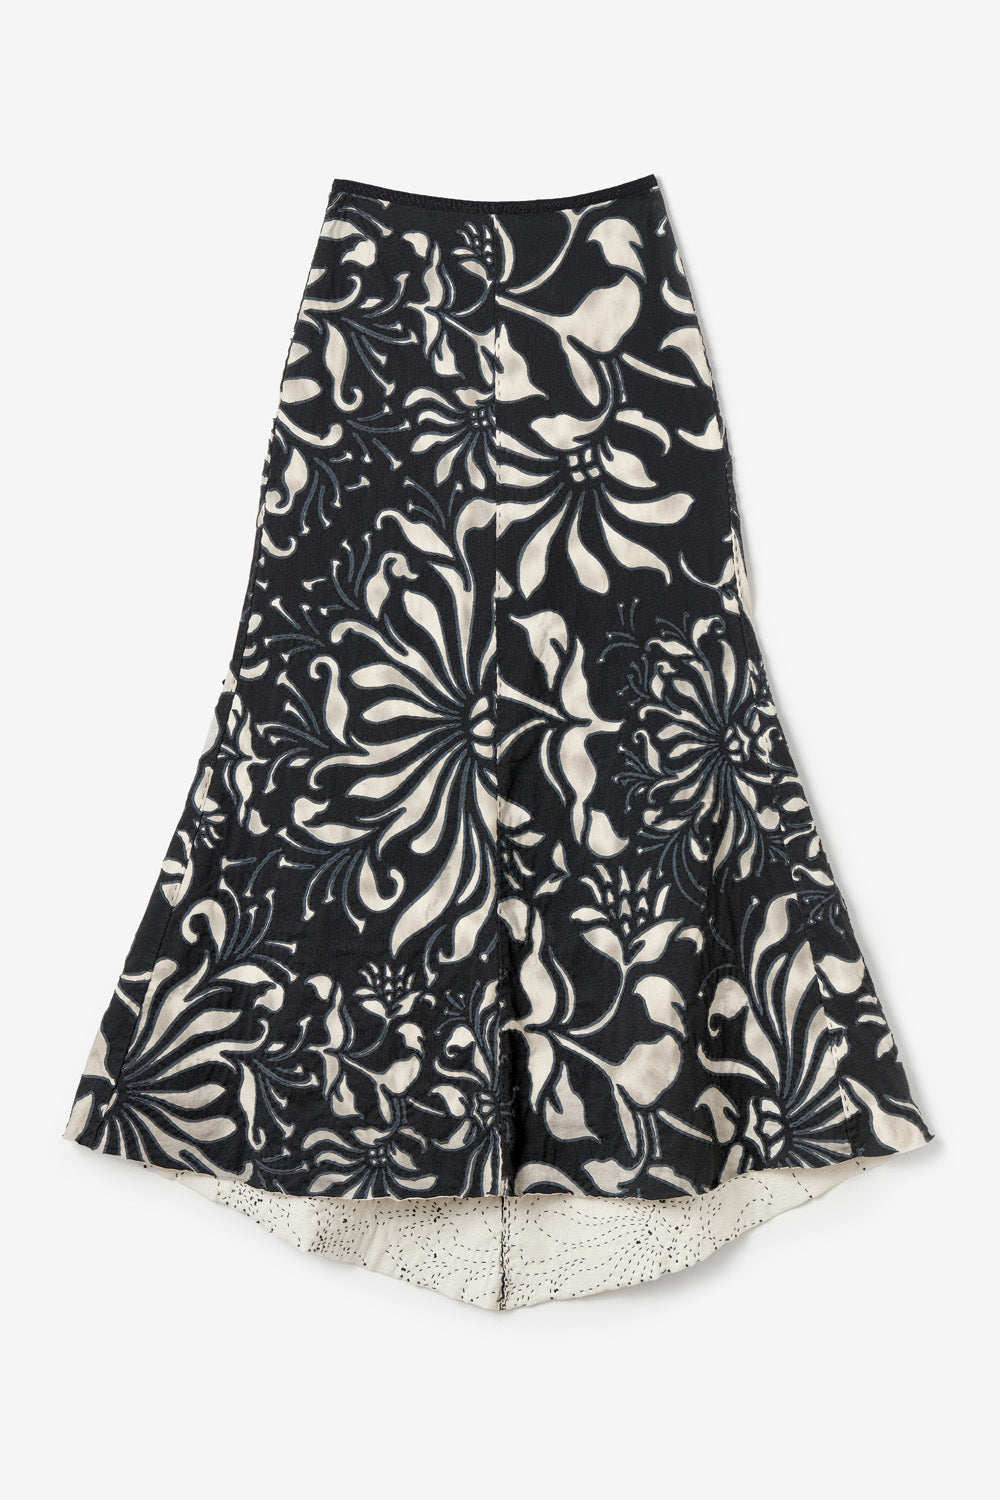 The School of Making Faded Maggie Long Skirt Kit with Faded Floral Fabric